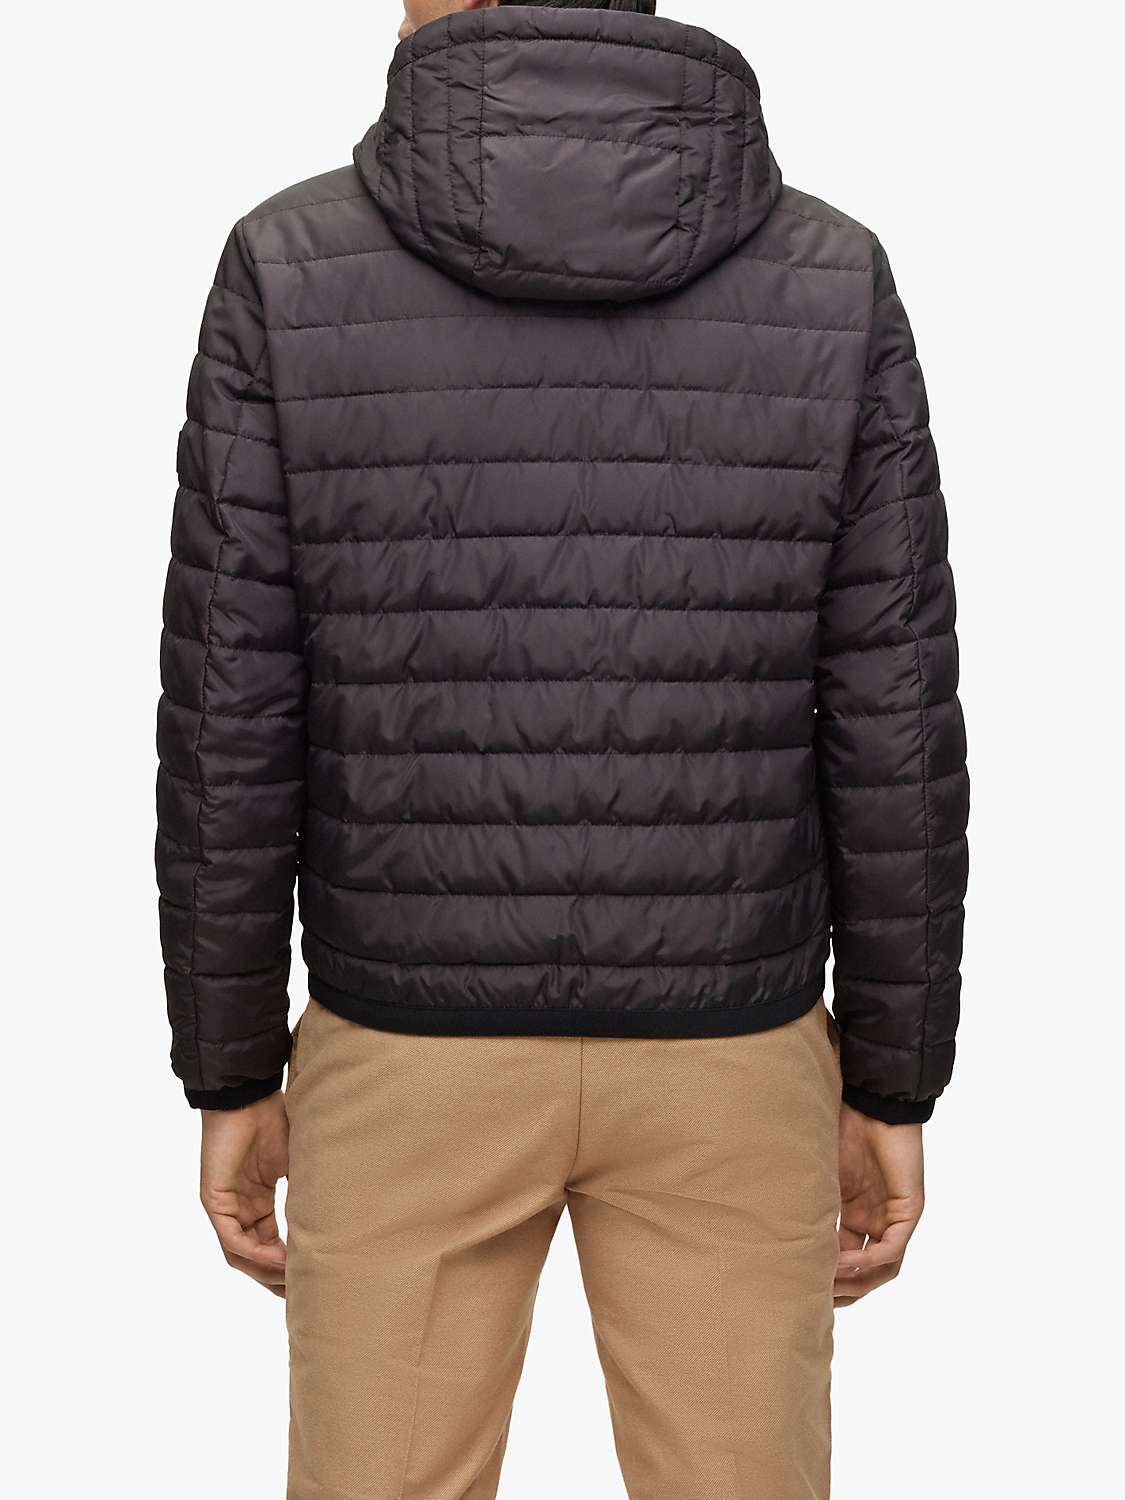 Buy BOSS Dawood Hooded Quilted Jacket Online at johnlewis.com